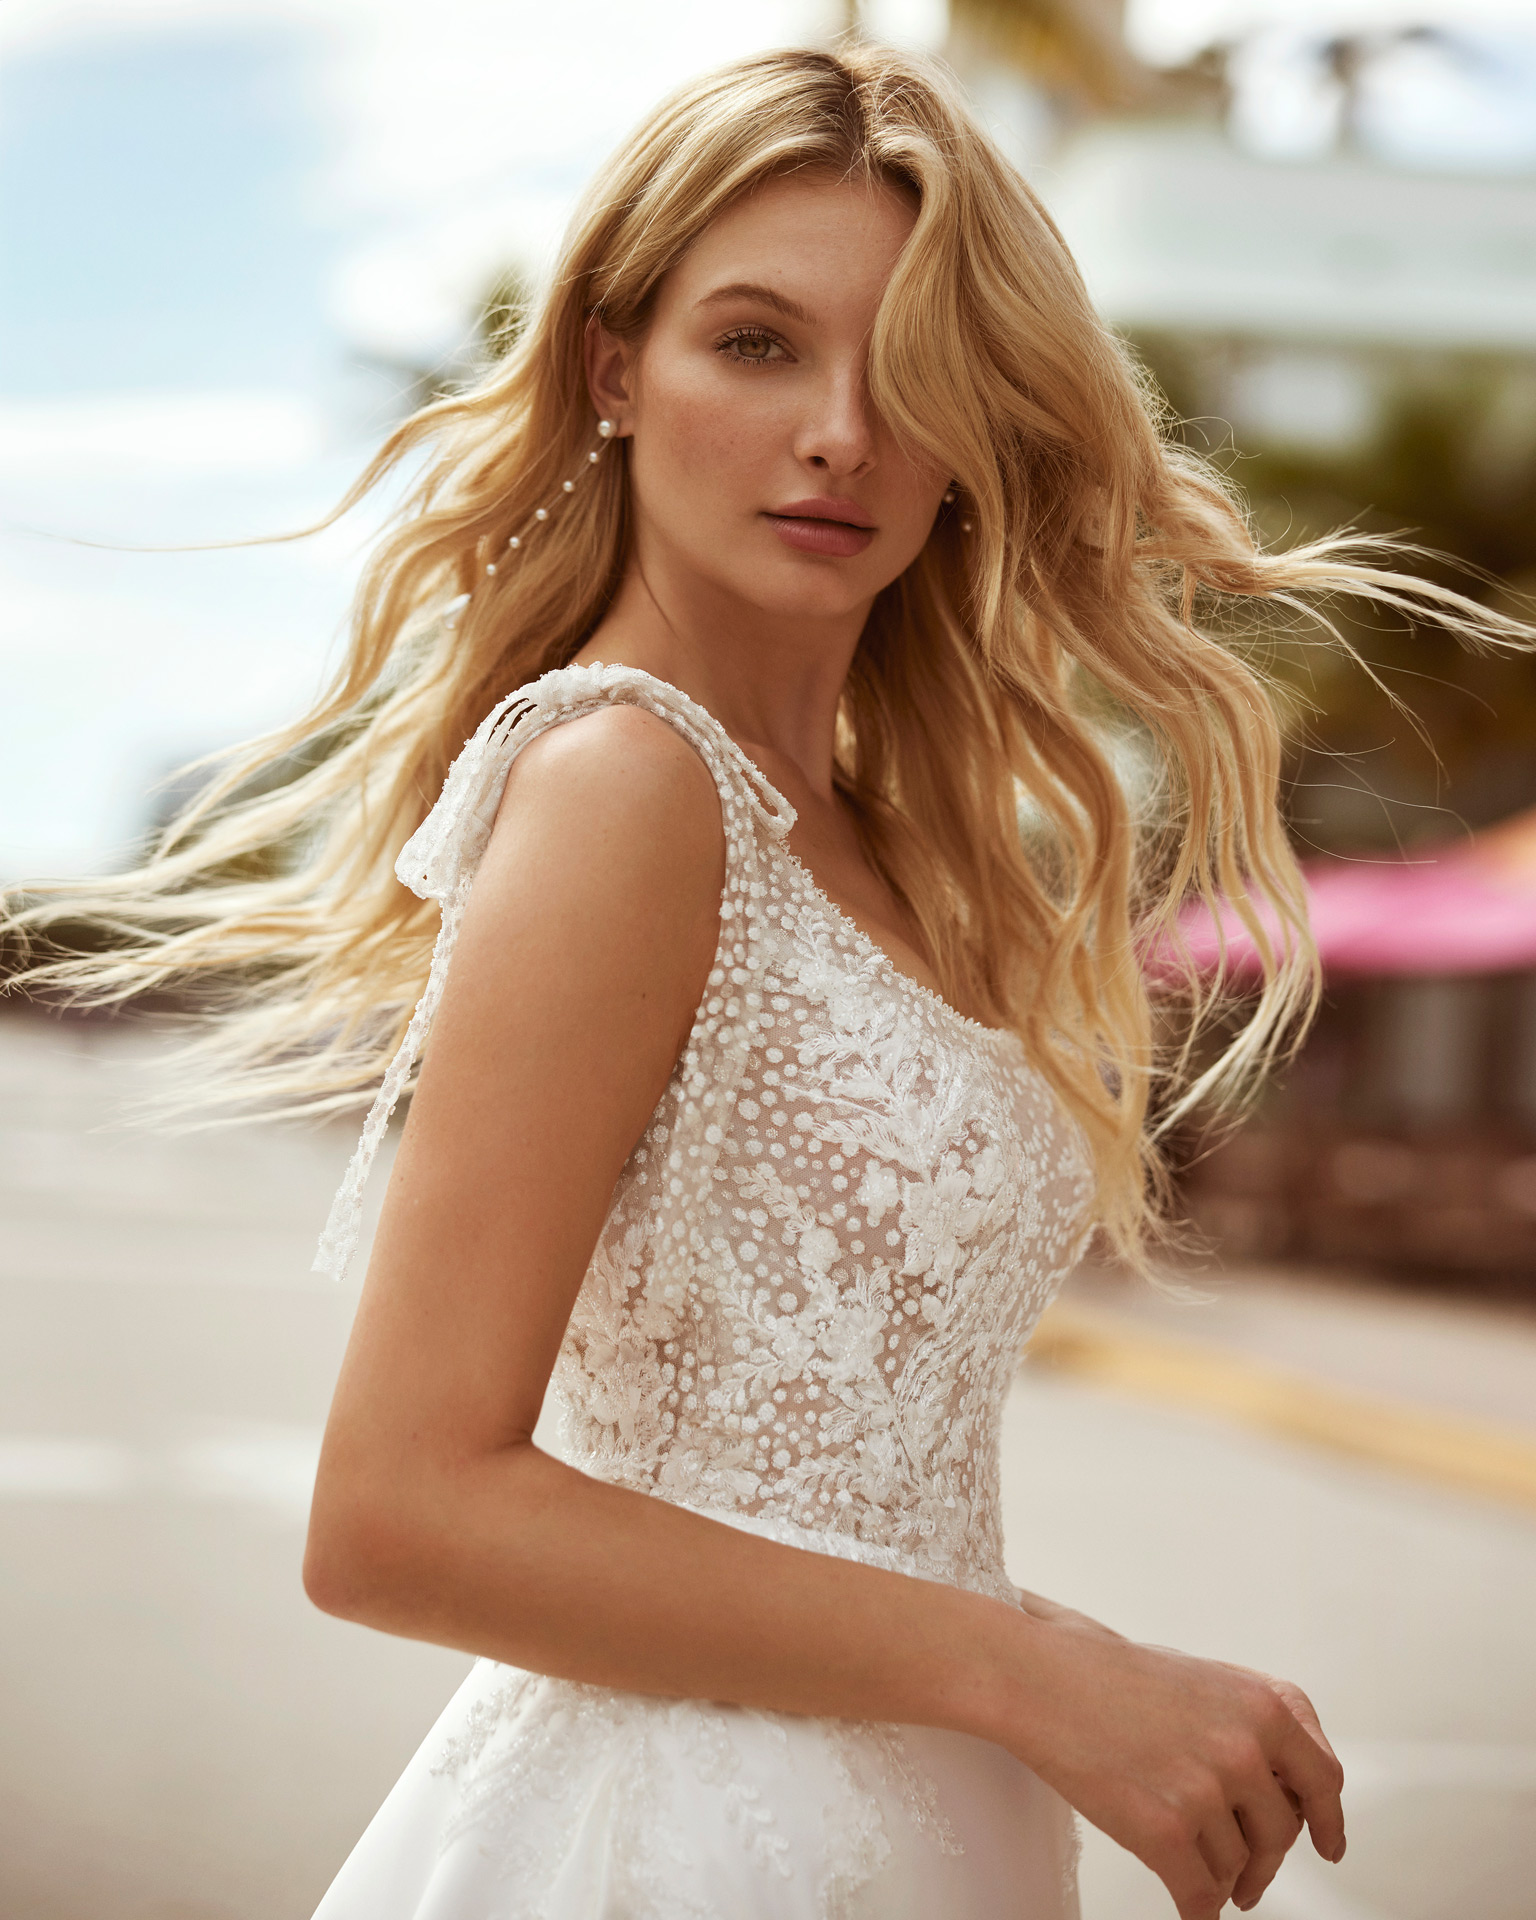 Classic princess wedding dress, made in mikado combined with lace and beadwork. Featuring a square neckline, square back and straps with ties. Stand out in this delicate Luna Novias design. LUNA_NOVIAS.